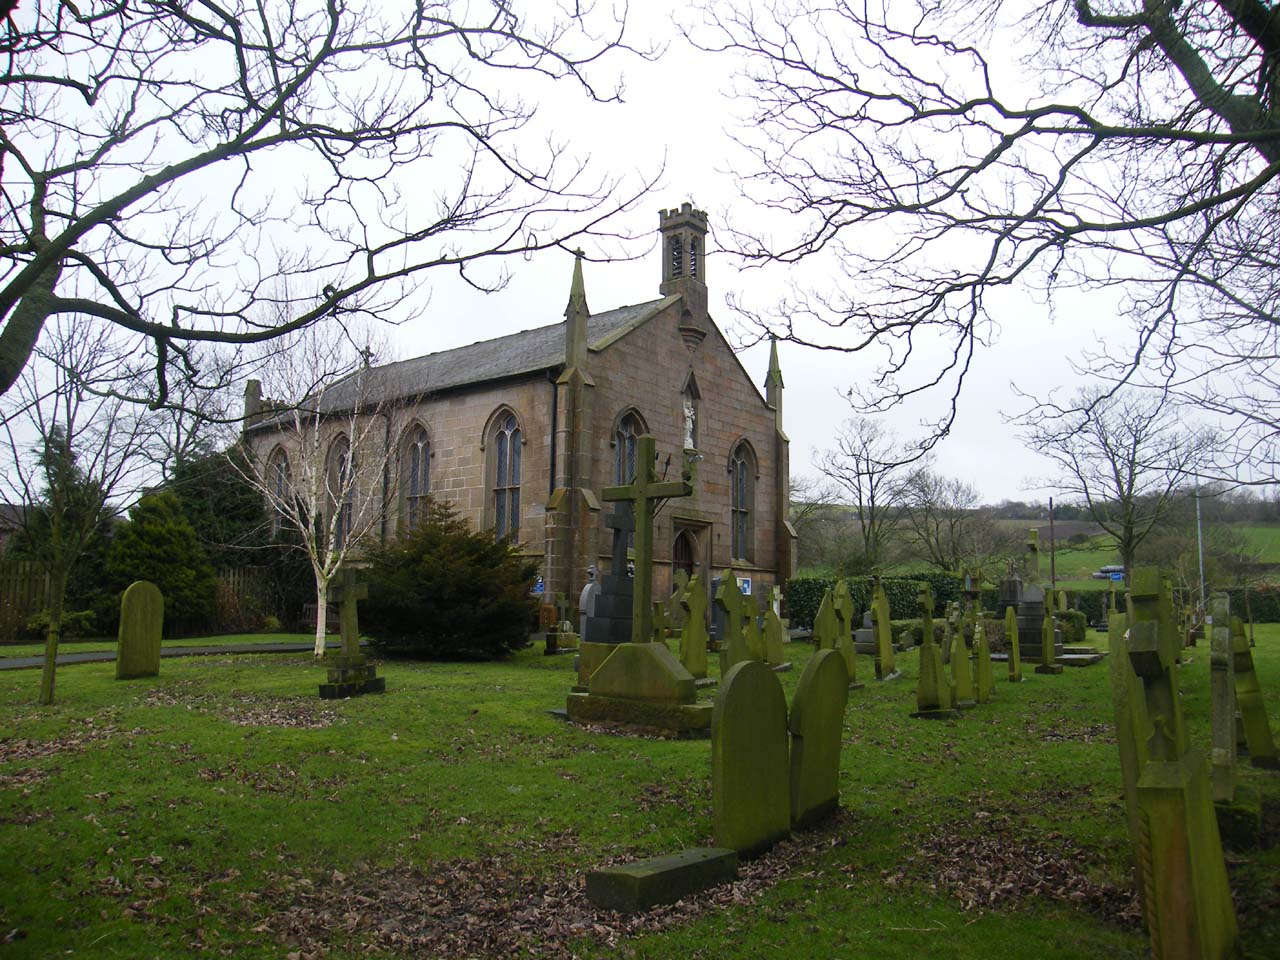 The Church of St Mary from the Graveyard